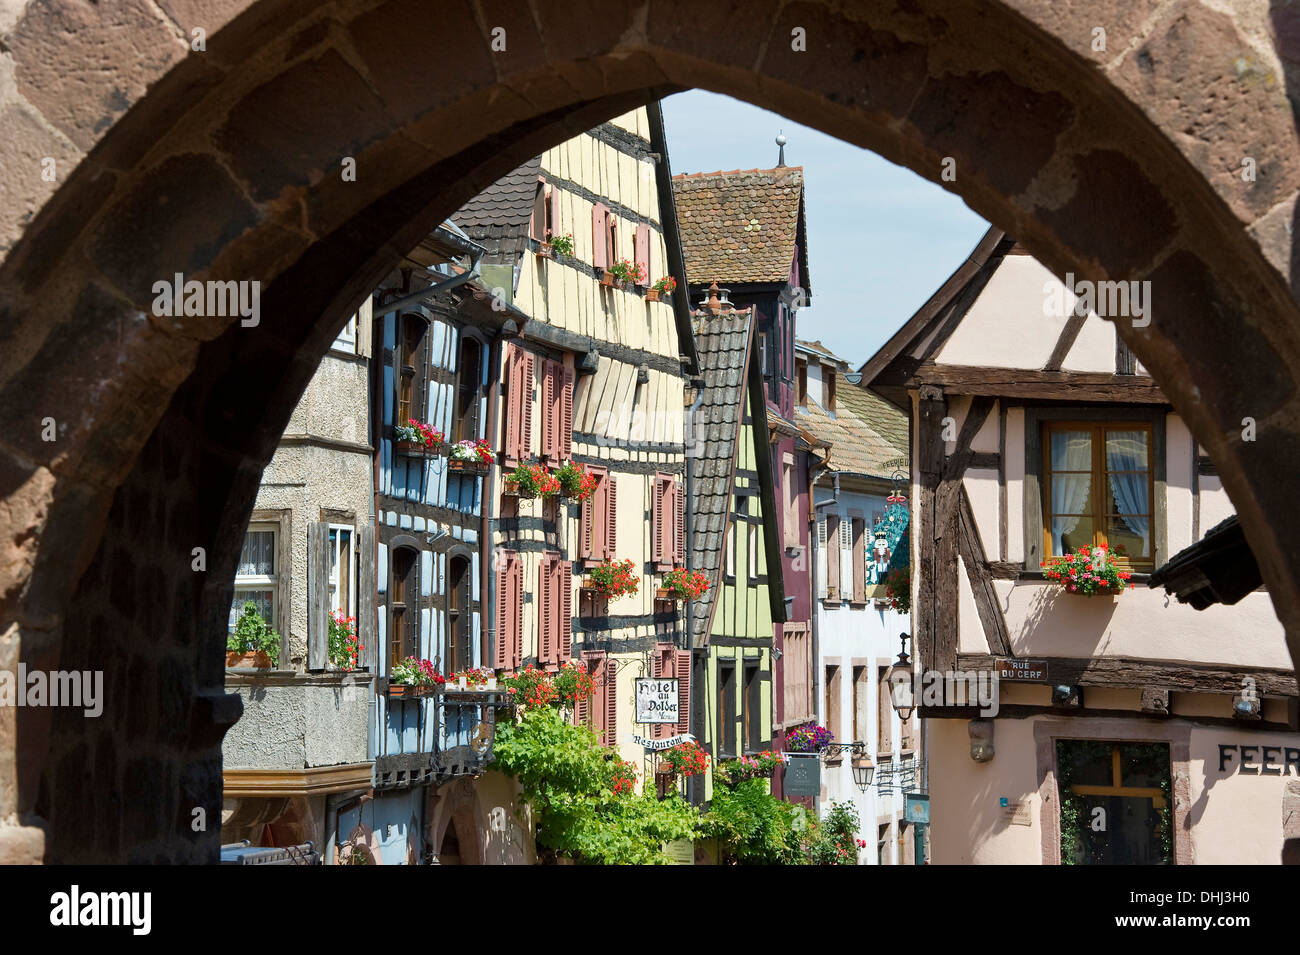 Half-timbered houses, Riquewihr, Alsace, France Stock Photo